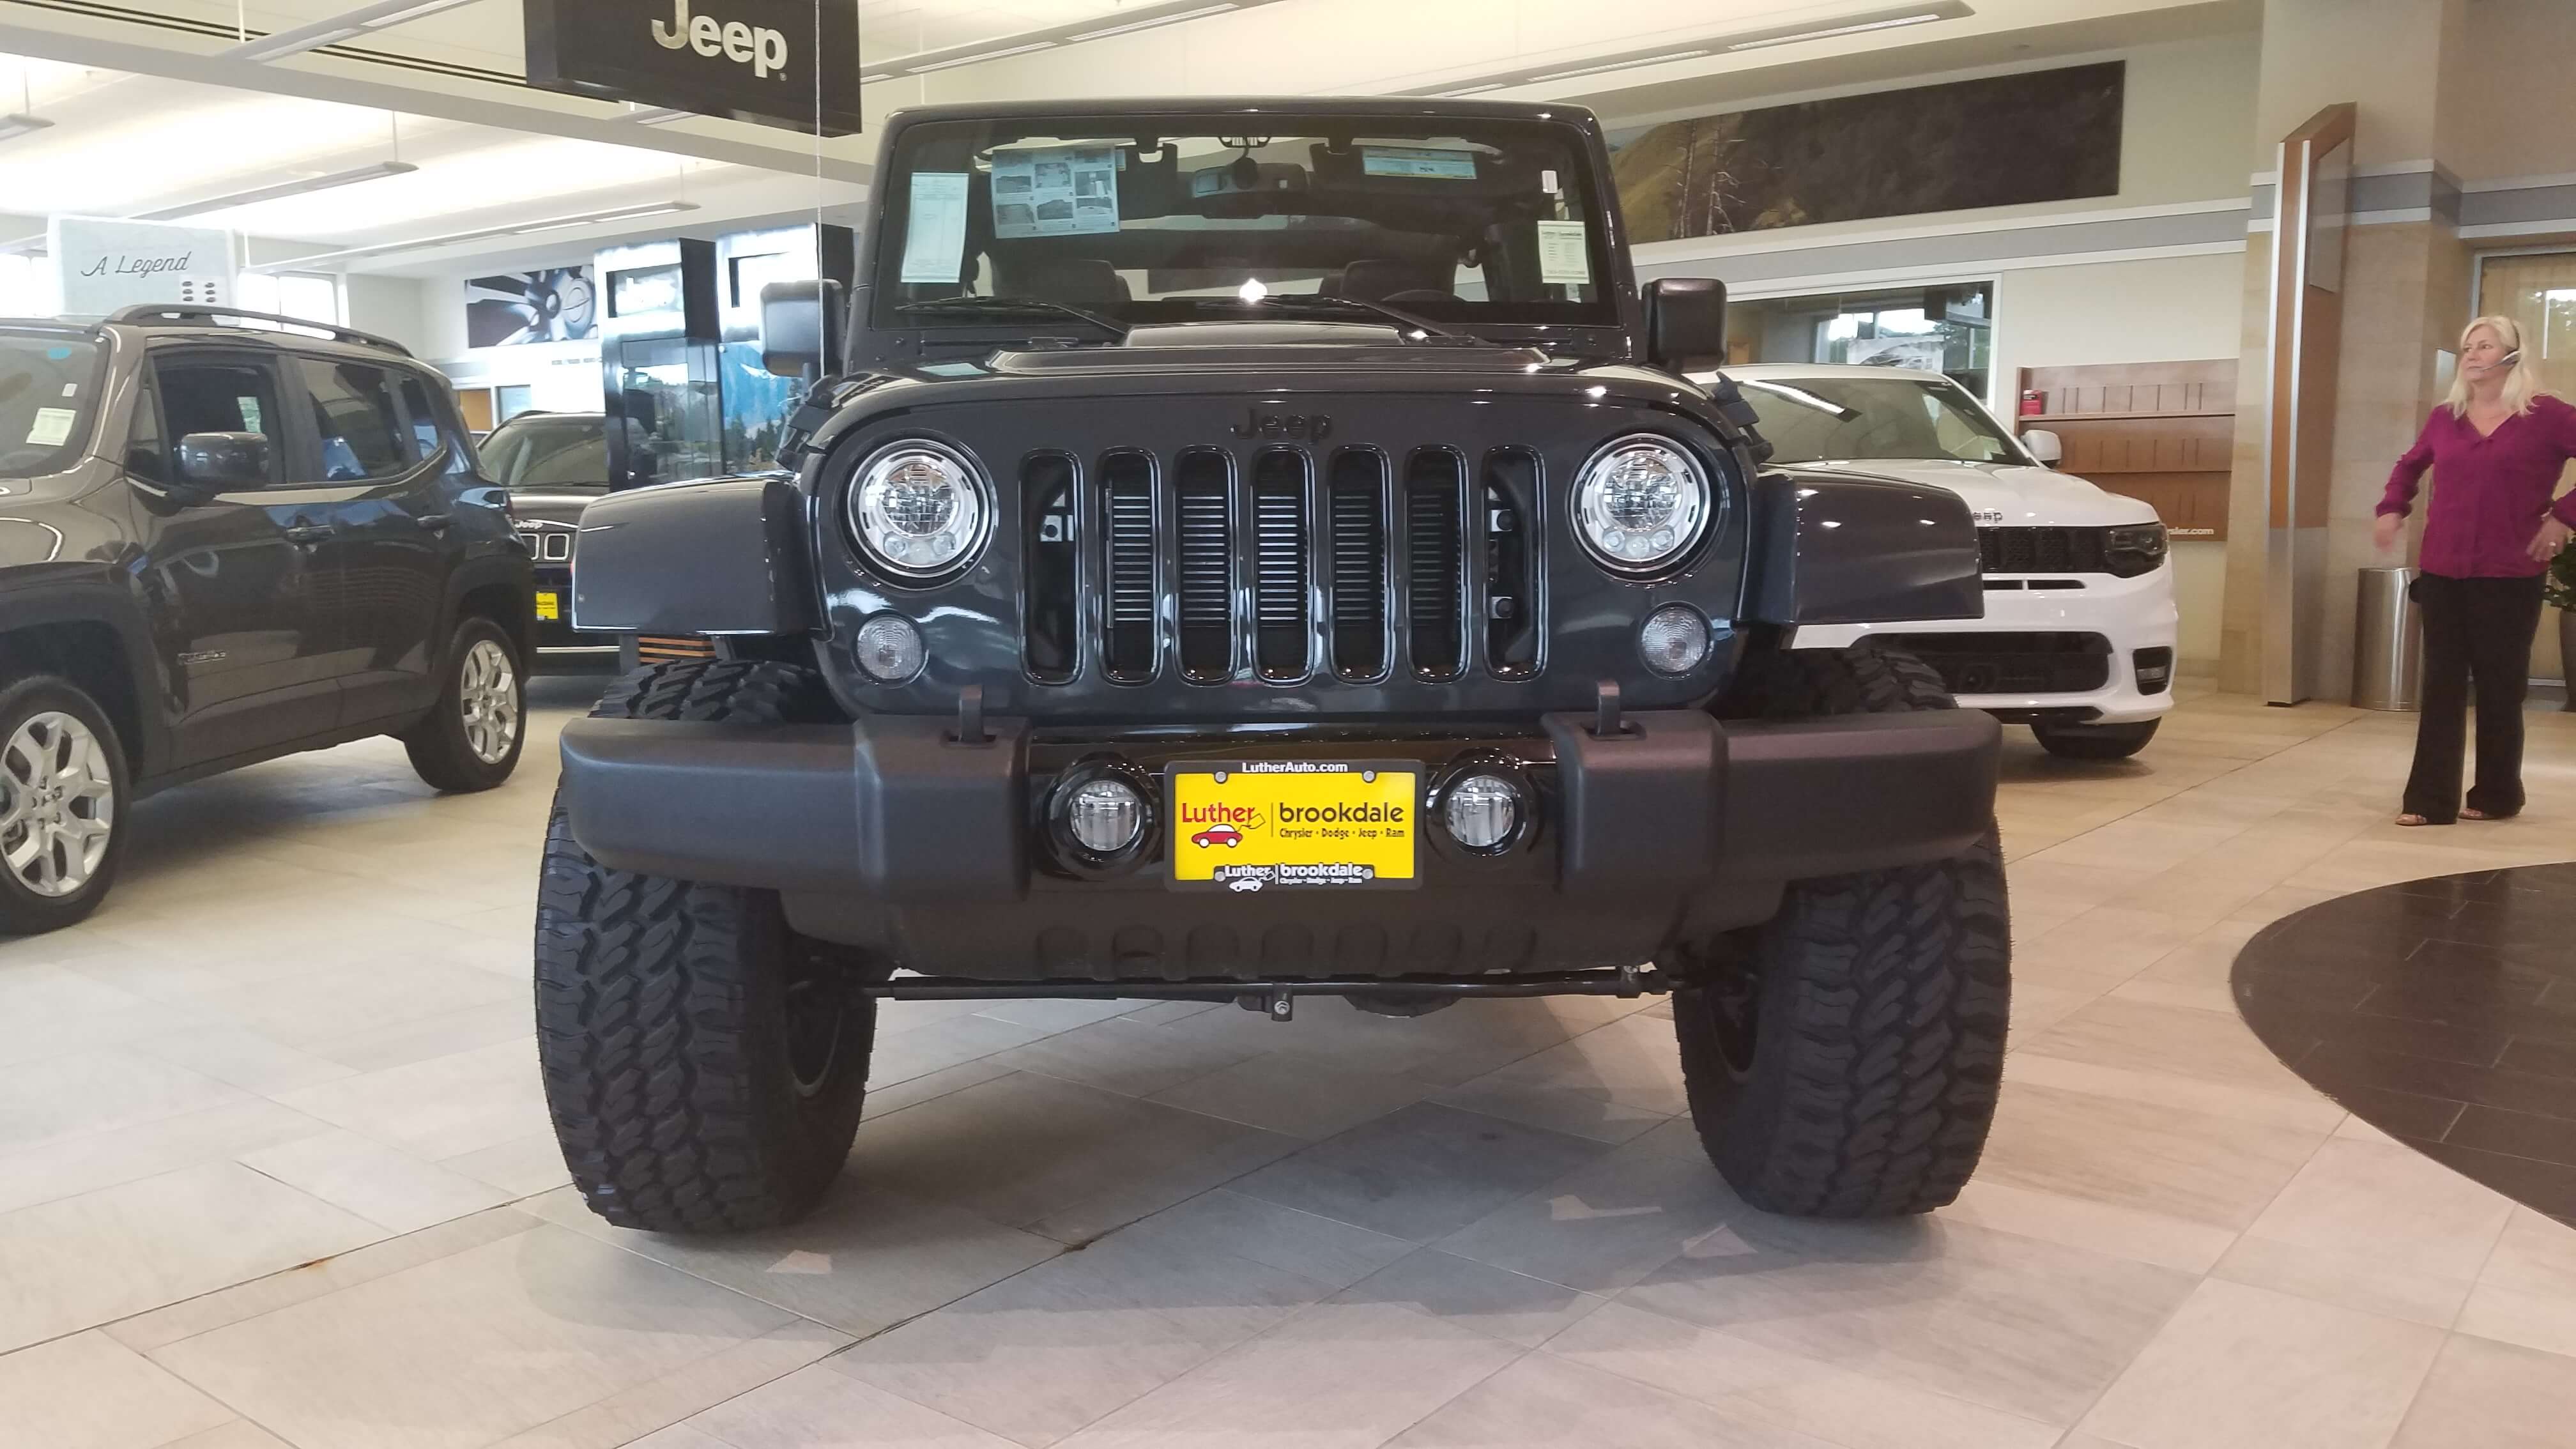 LED Headlamps provide brilliant performance and off road durability. Has a long life, excellent road side lighting, defined beam pattern and the Jeep logo.